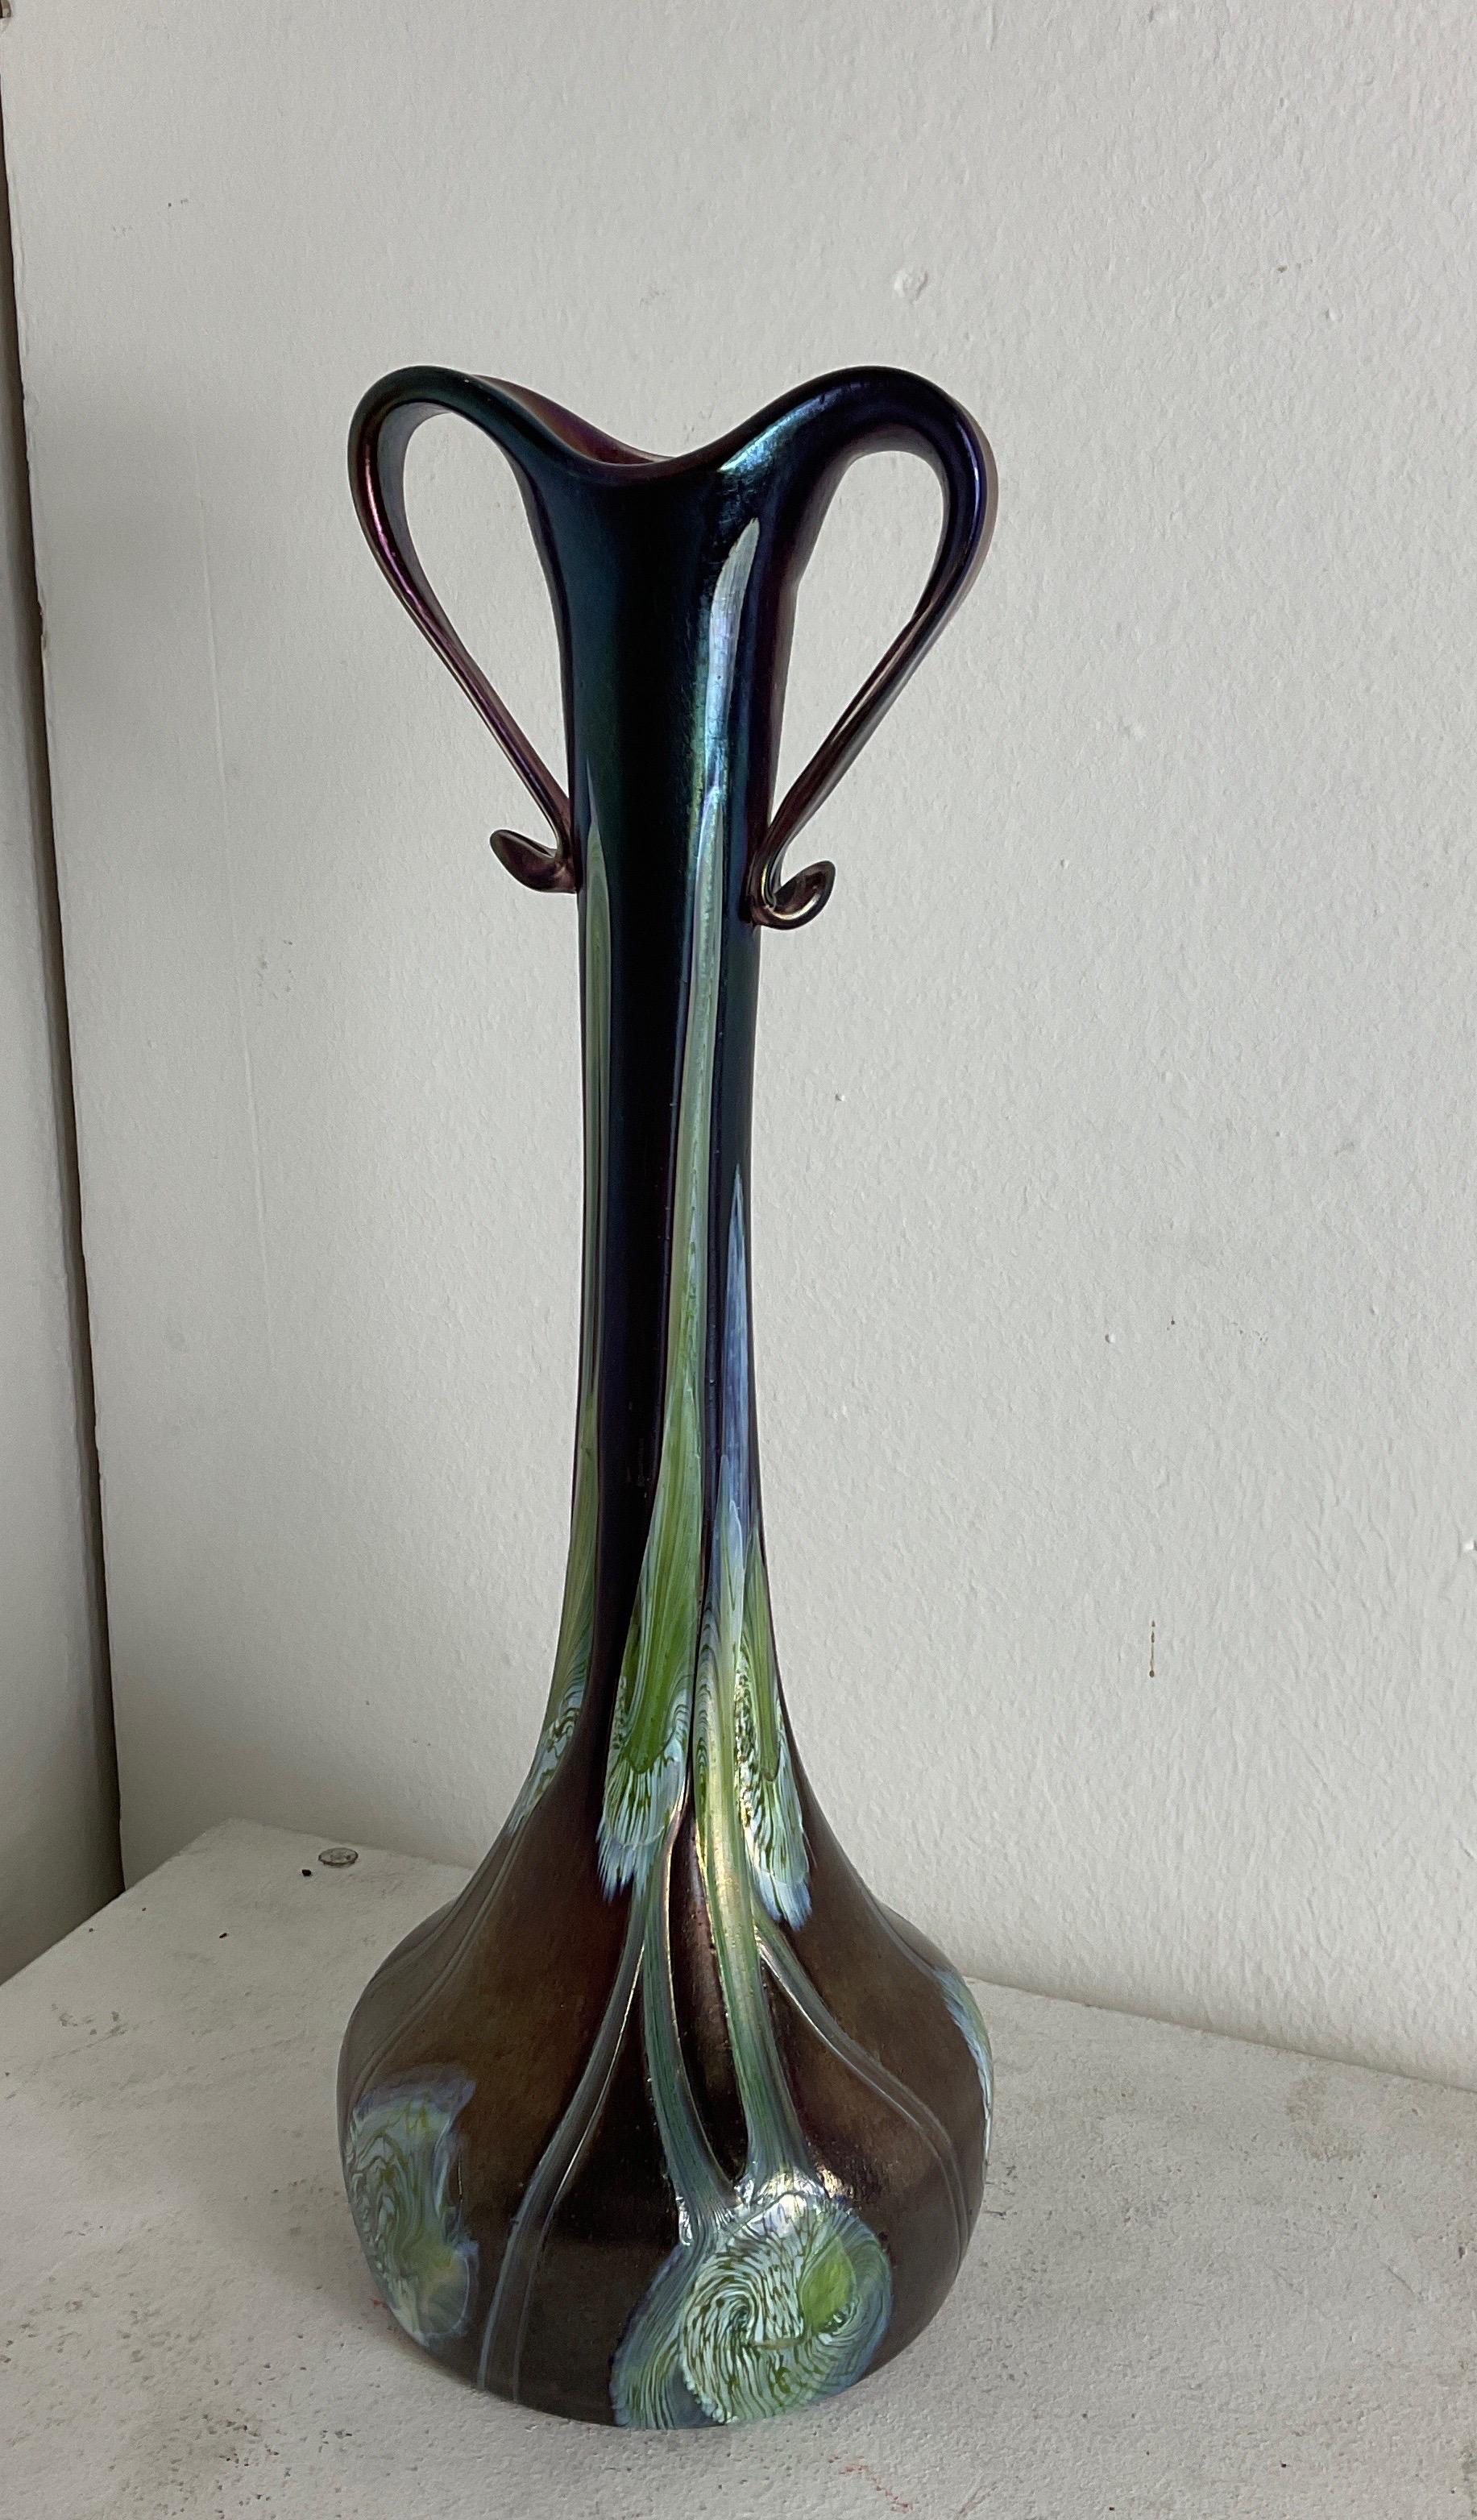 Vase with two handles, Robert Holubetz, Johann Loetz Witwe for E. Bakalowits Sohne, decor Olympia, ca. 1893 This handle vase captivates with its simple and at the same time elegant shape. Like the stem of a flower protruding from its bulb, the